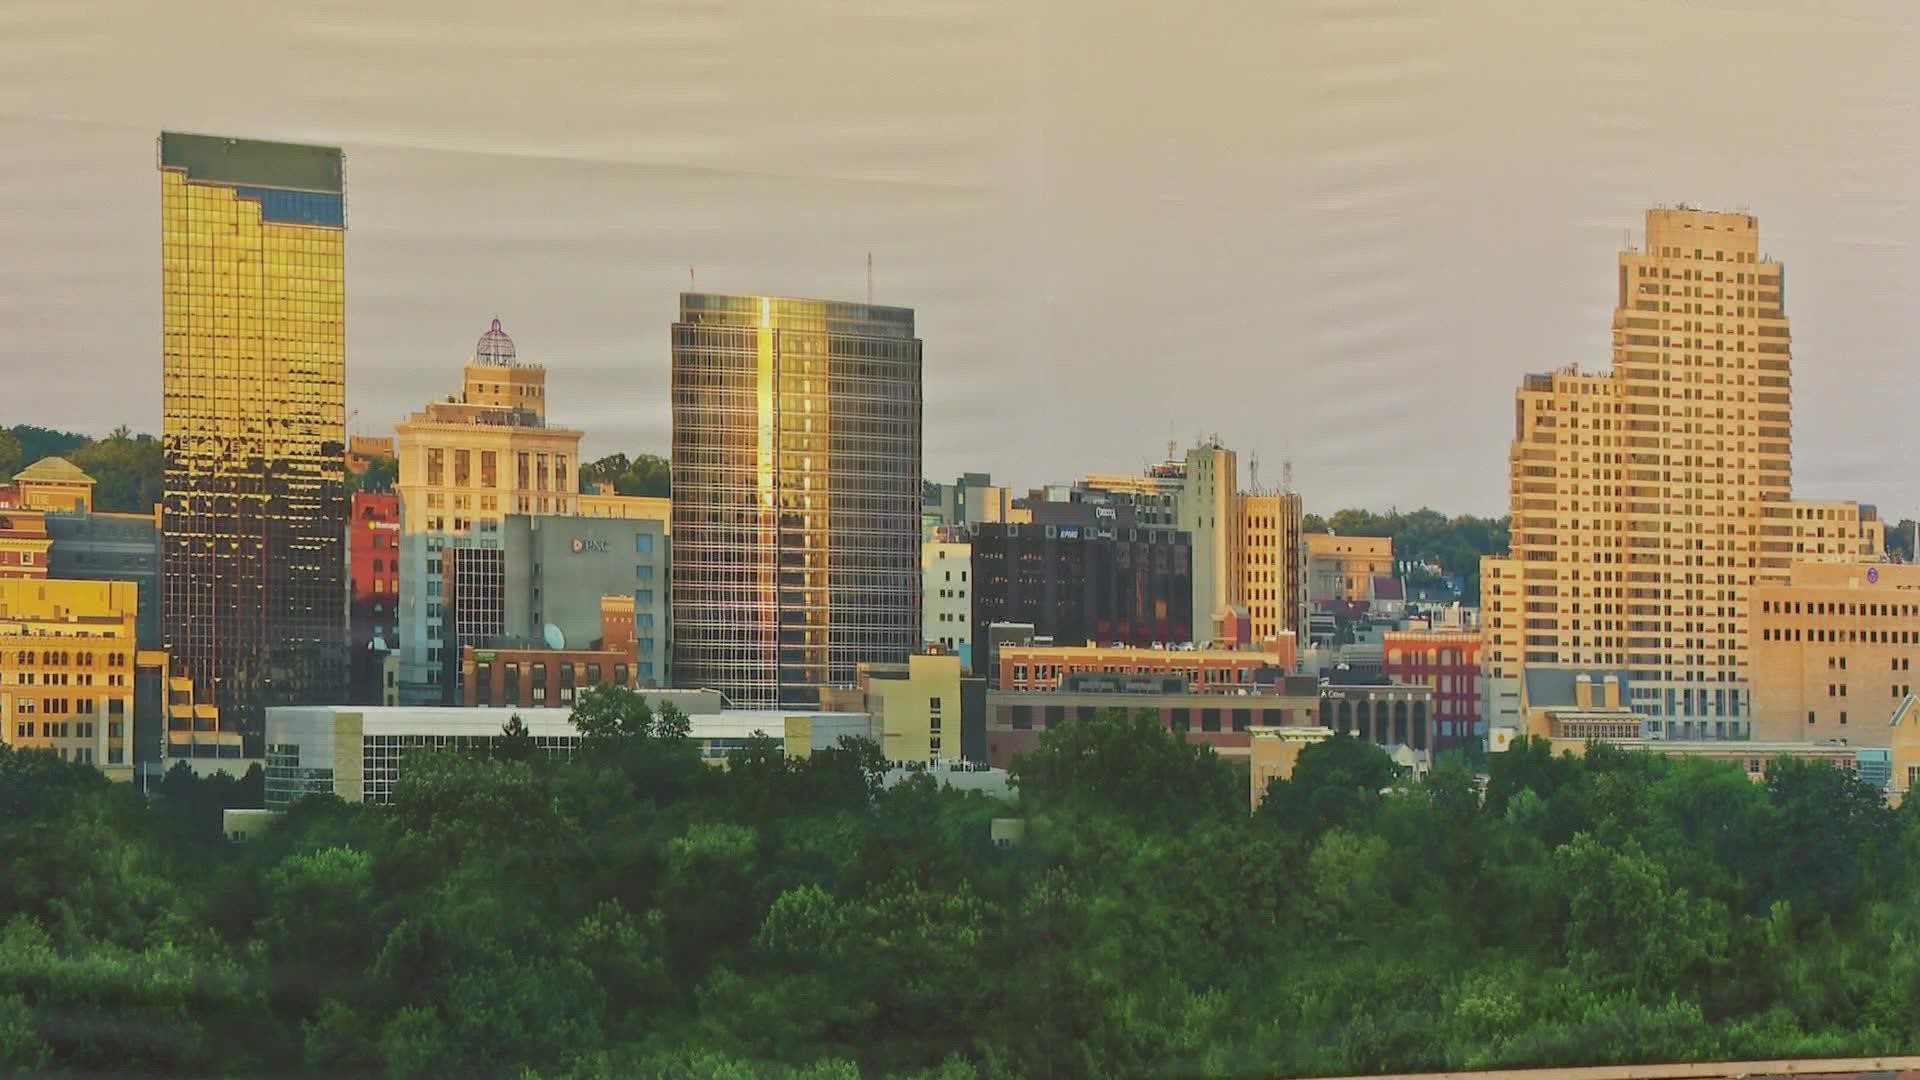 On July 7, 2018, photographer Dave Thompson decided to take a panoramic picture of his hometown. Three years later, it's 60-feet long and entered in ArtPrize.